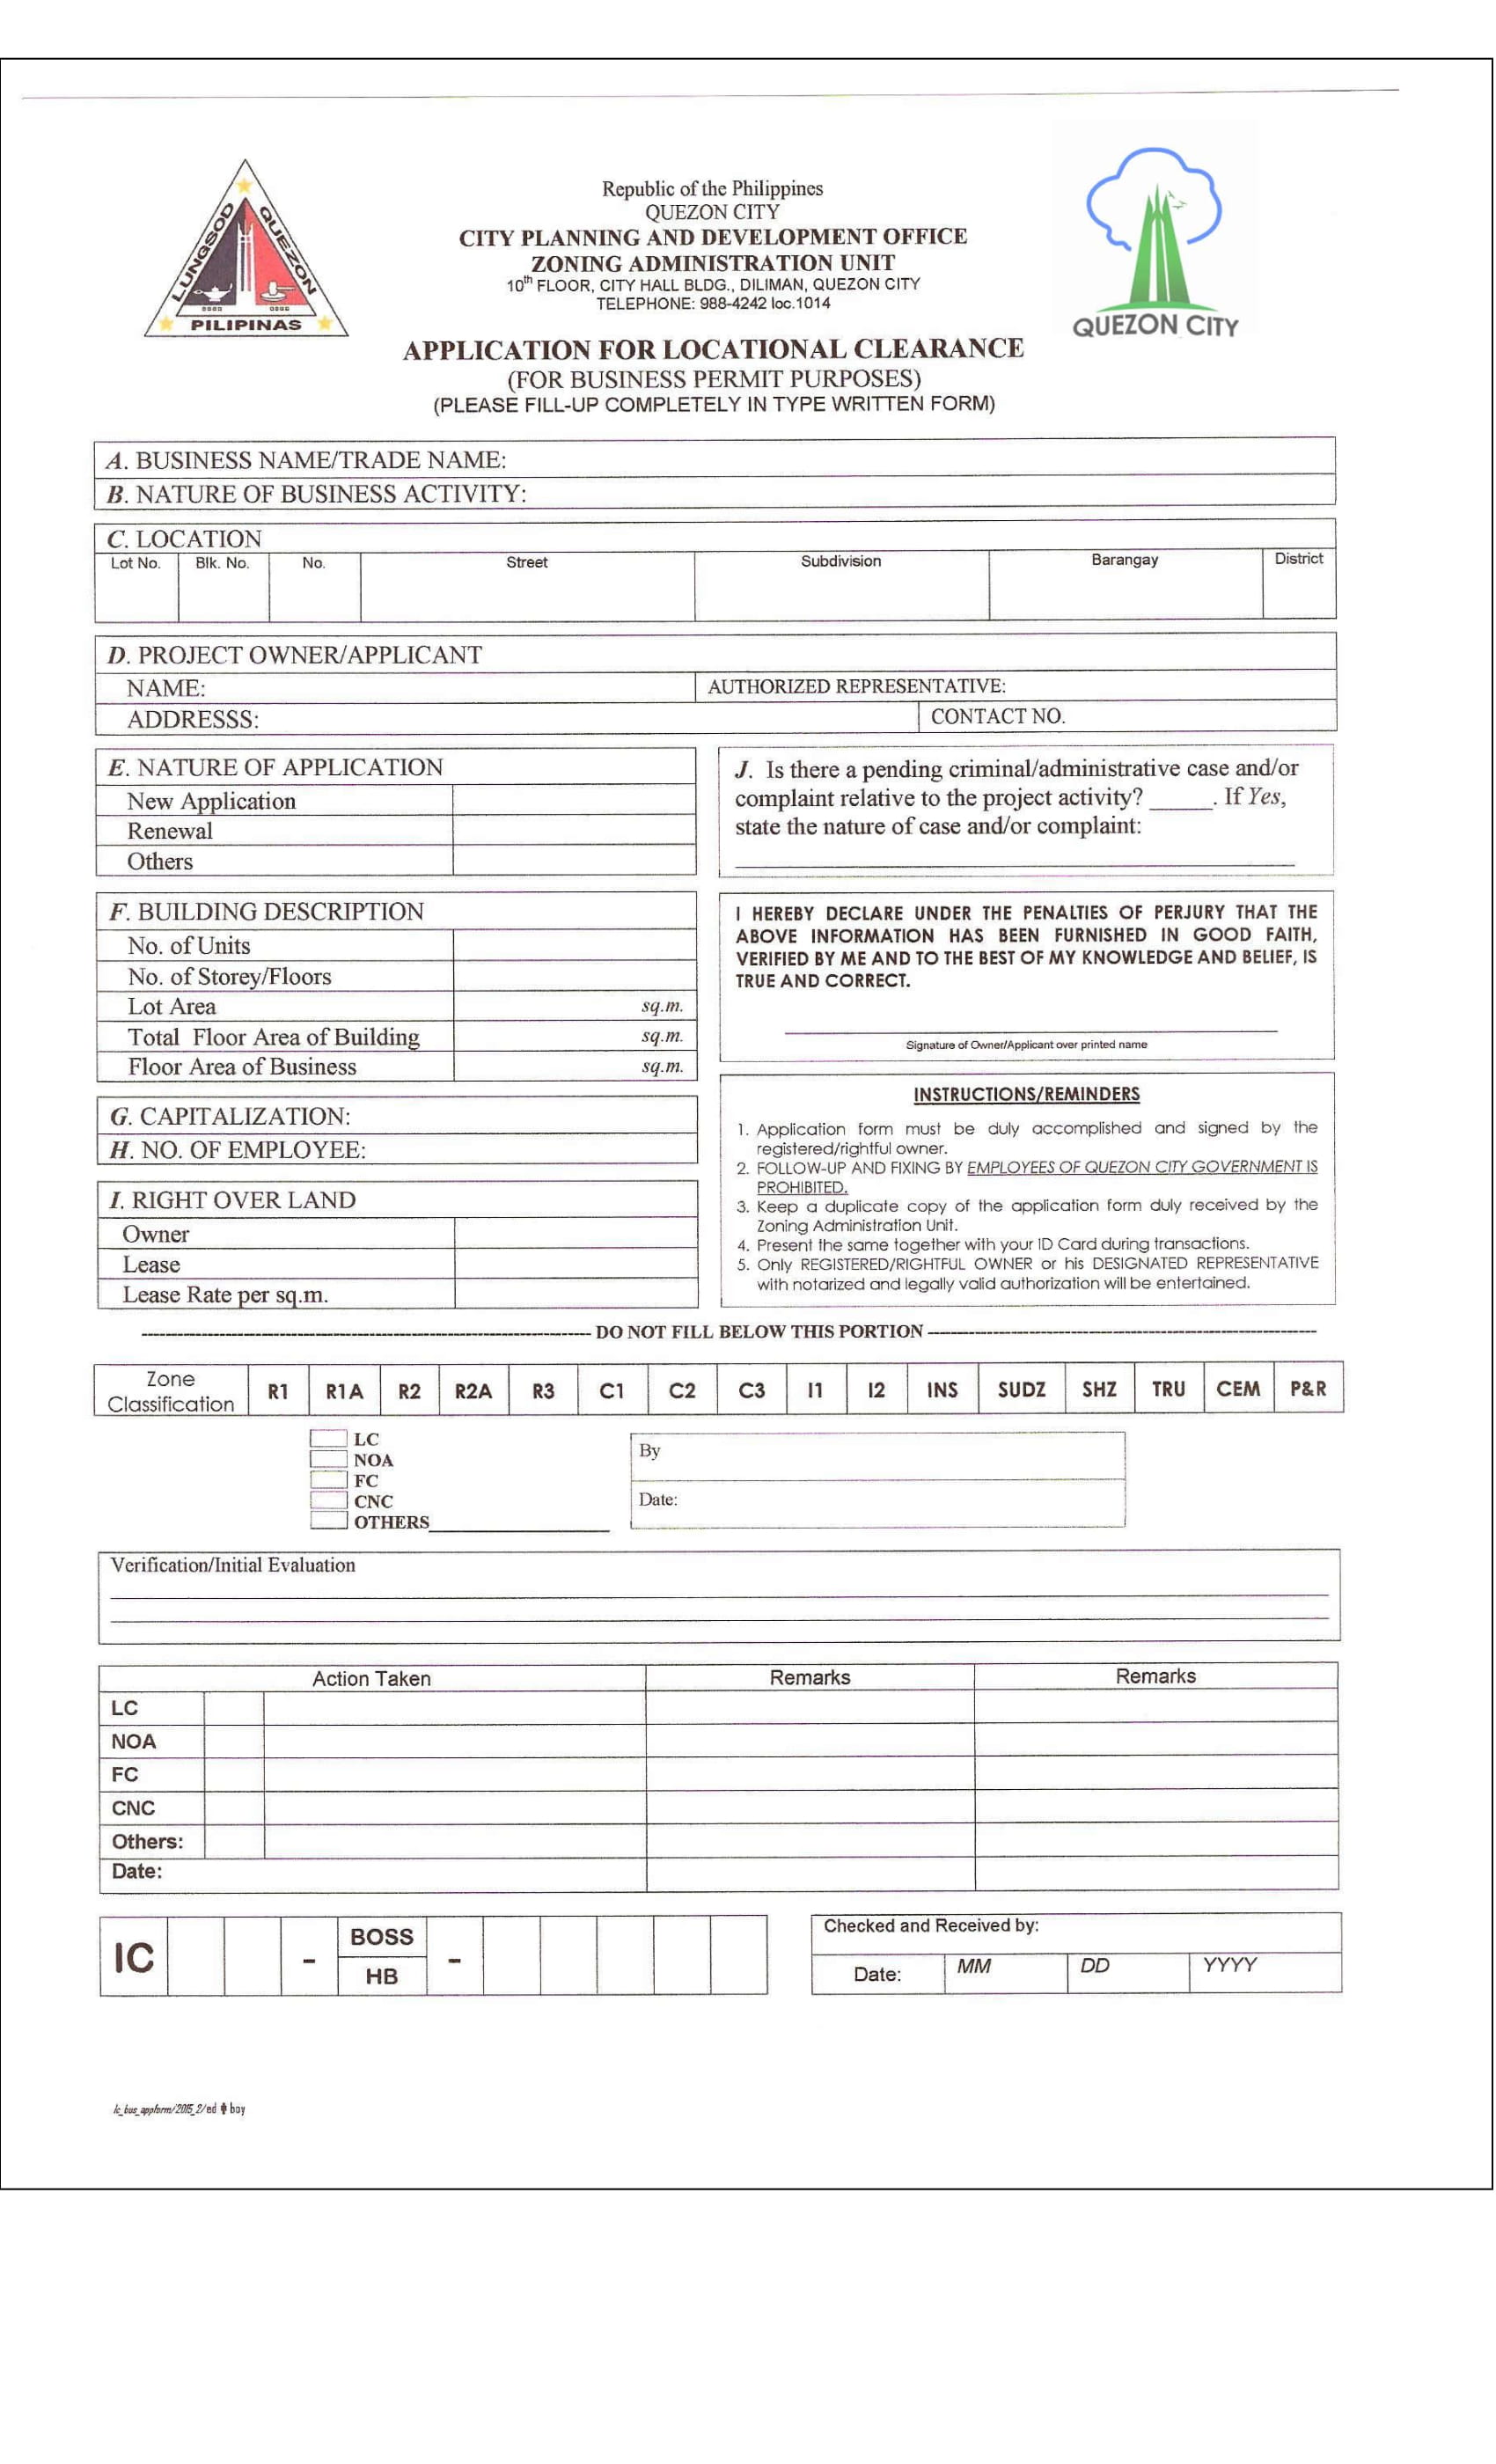 application for locational clearance 1